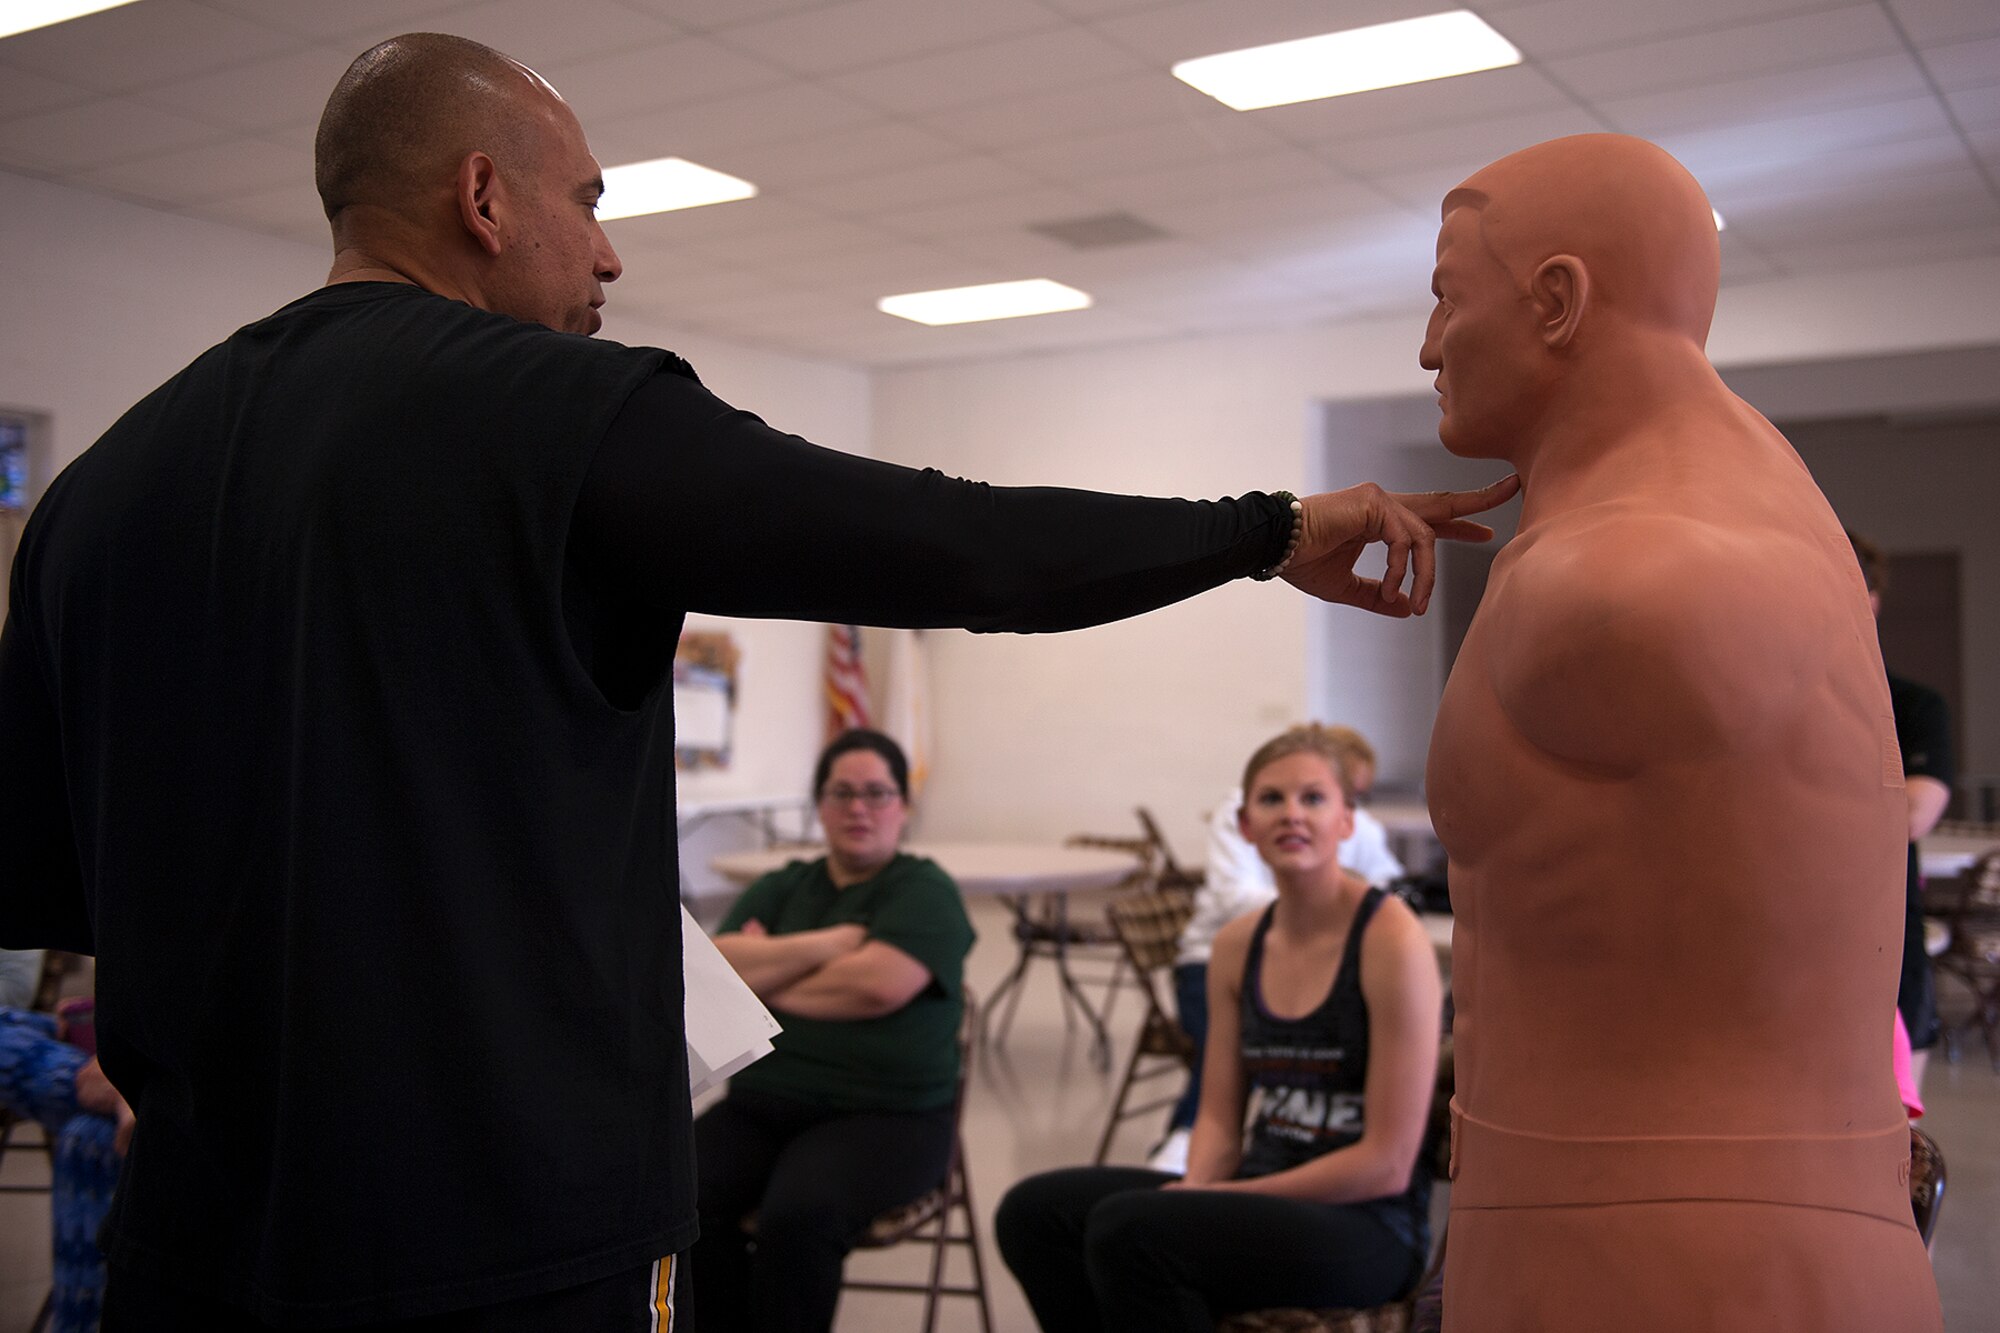 Mark E. Ledesma, 315th Training Squadron emerging technologies chief, points to specific target areas to attack during a self-defense class at St. Marks Presbyterian Church, San Angelo, Texas, Feb. 27, 2016. Ledesma, who also teaches ‘Target Hardening Self-Defense’ classes externally, taught the Mommy Fit Camp members for free.  (U.S. Air Force photo by Airman 1st Class Caelynn Ferguson/Released)
